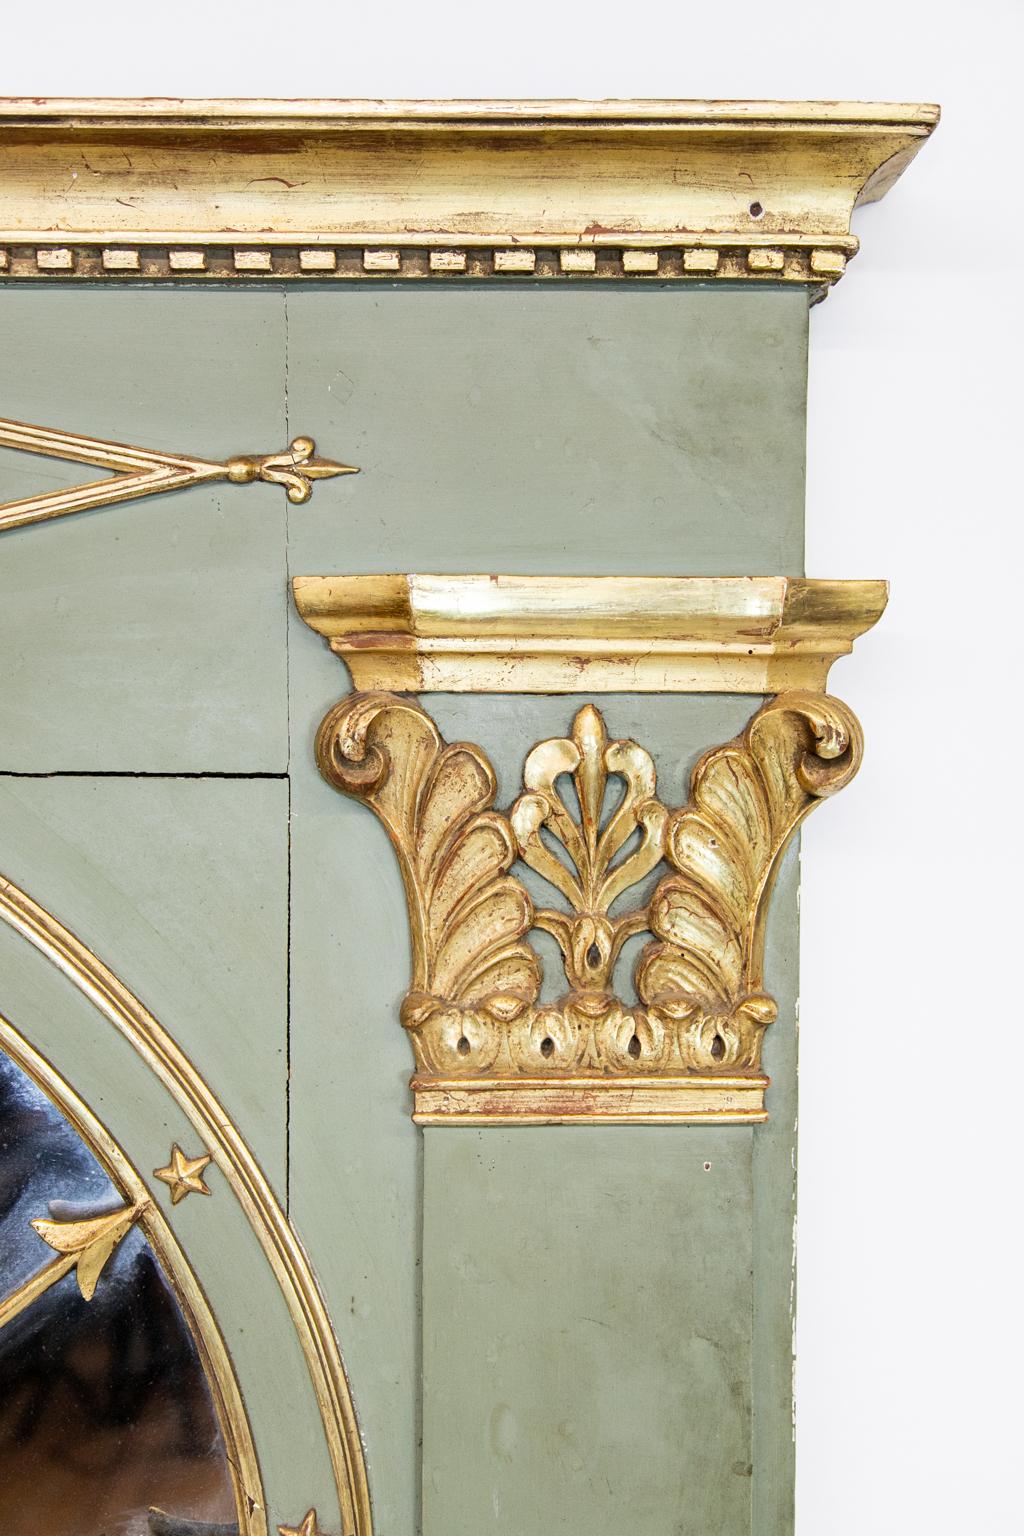 French painted and gilt mirror has simulated pilasters on the sides with carved elongated marquees with carved center medallions. It is tipped at the ends with fleur-de-lis. It has gilt Corinthian capitals and an arch mirror depicting seven arrows